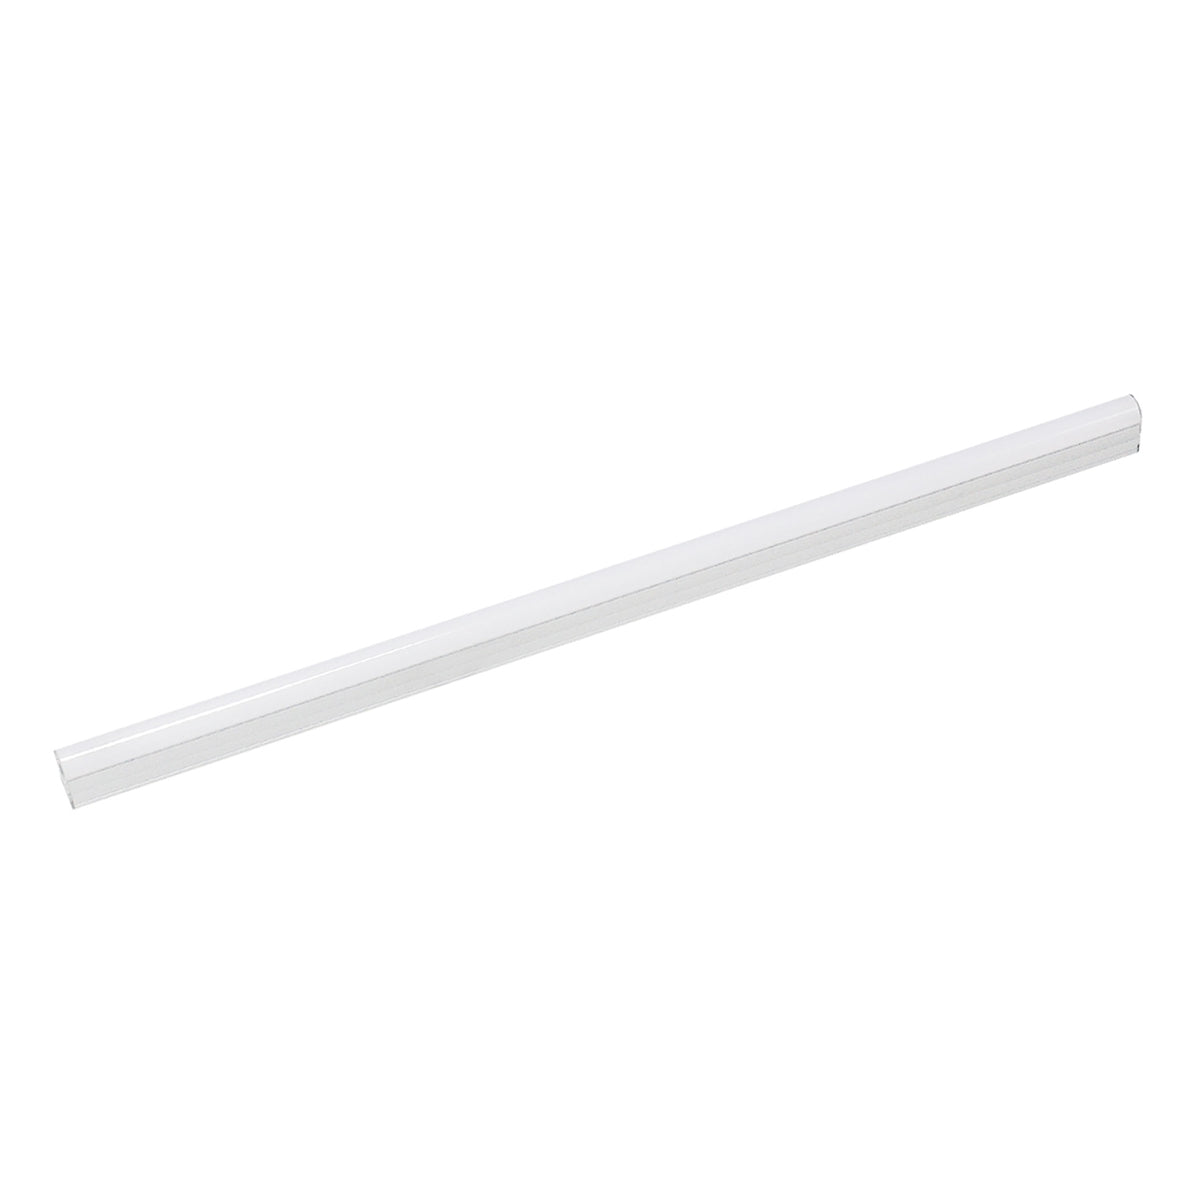 ELK Lighting ZS606RSF ZeeStick 1-Light Utility Light in White with Frosted White Polycarbonate Diffuser - Integrated LED